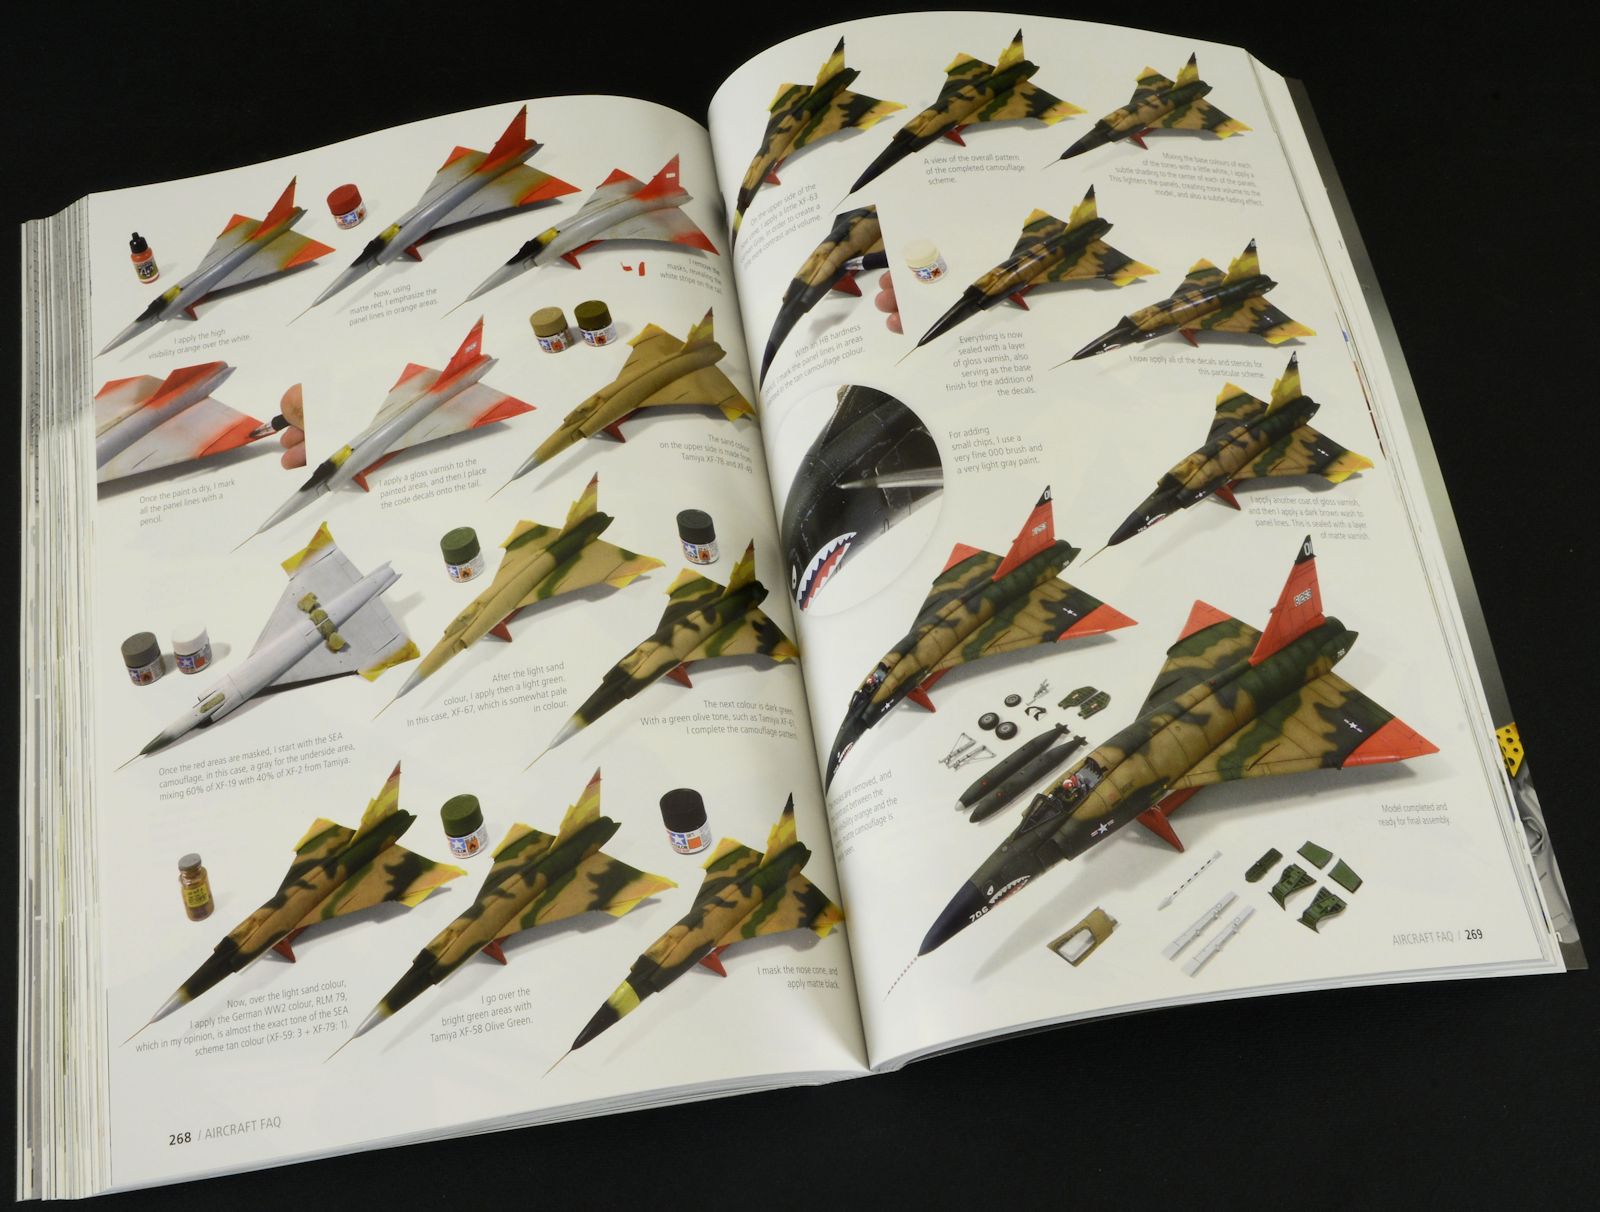 The Modelling News: Read n’ reviewed: Aircraft Scale Modelling F.A.Q.